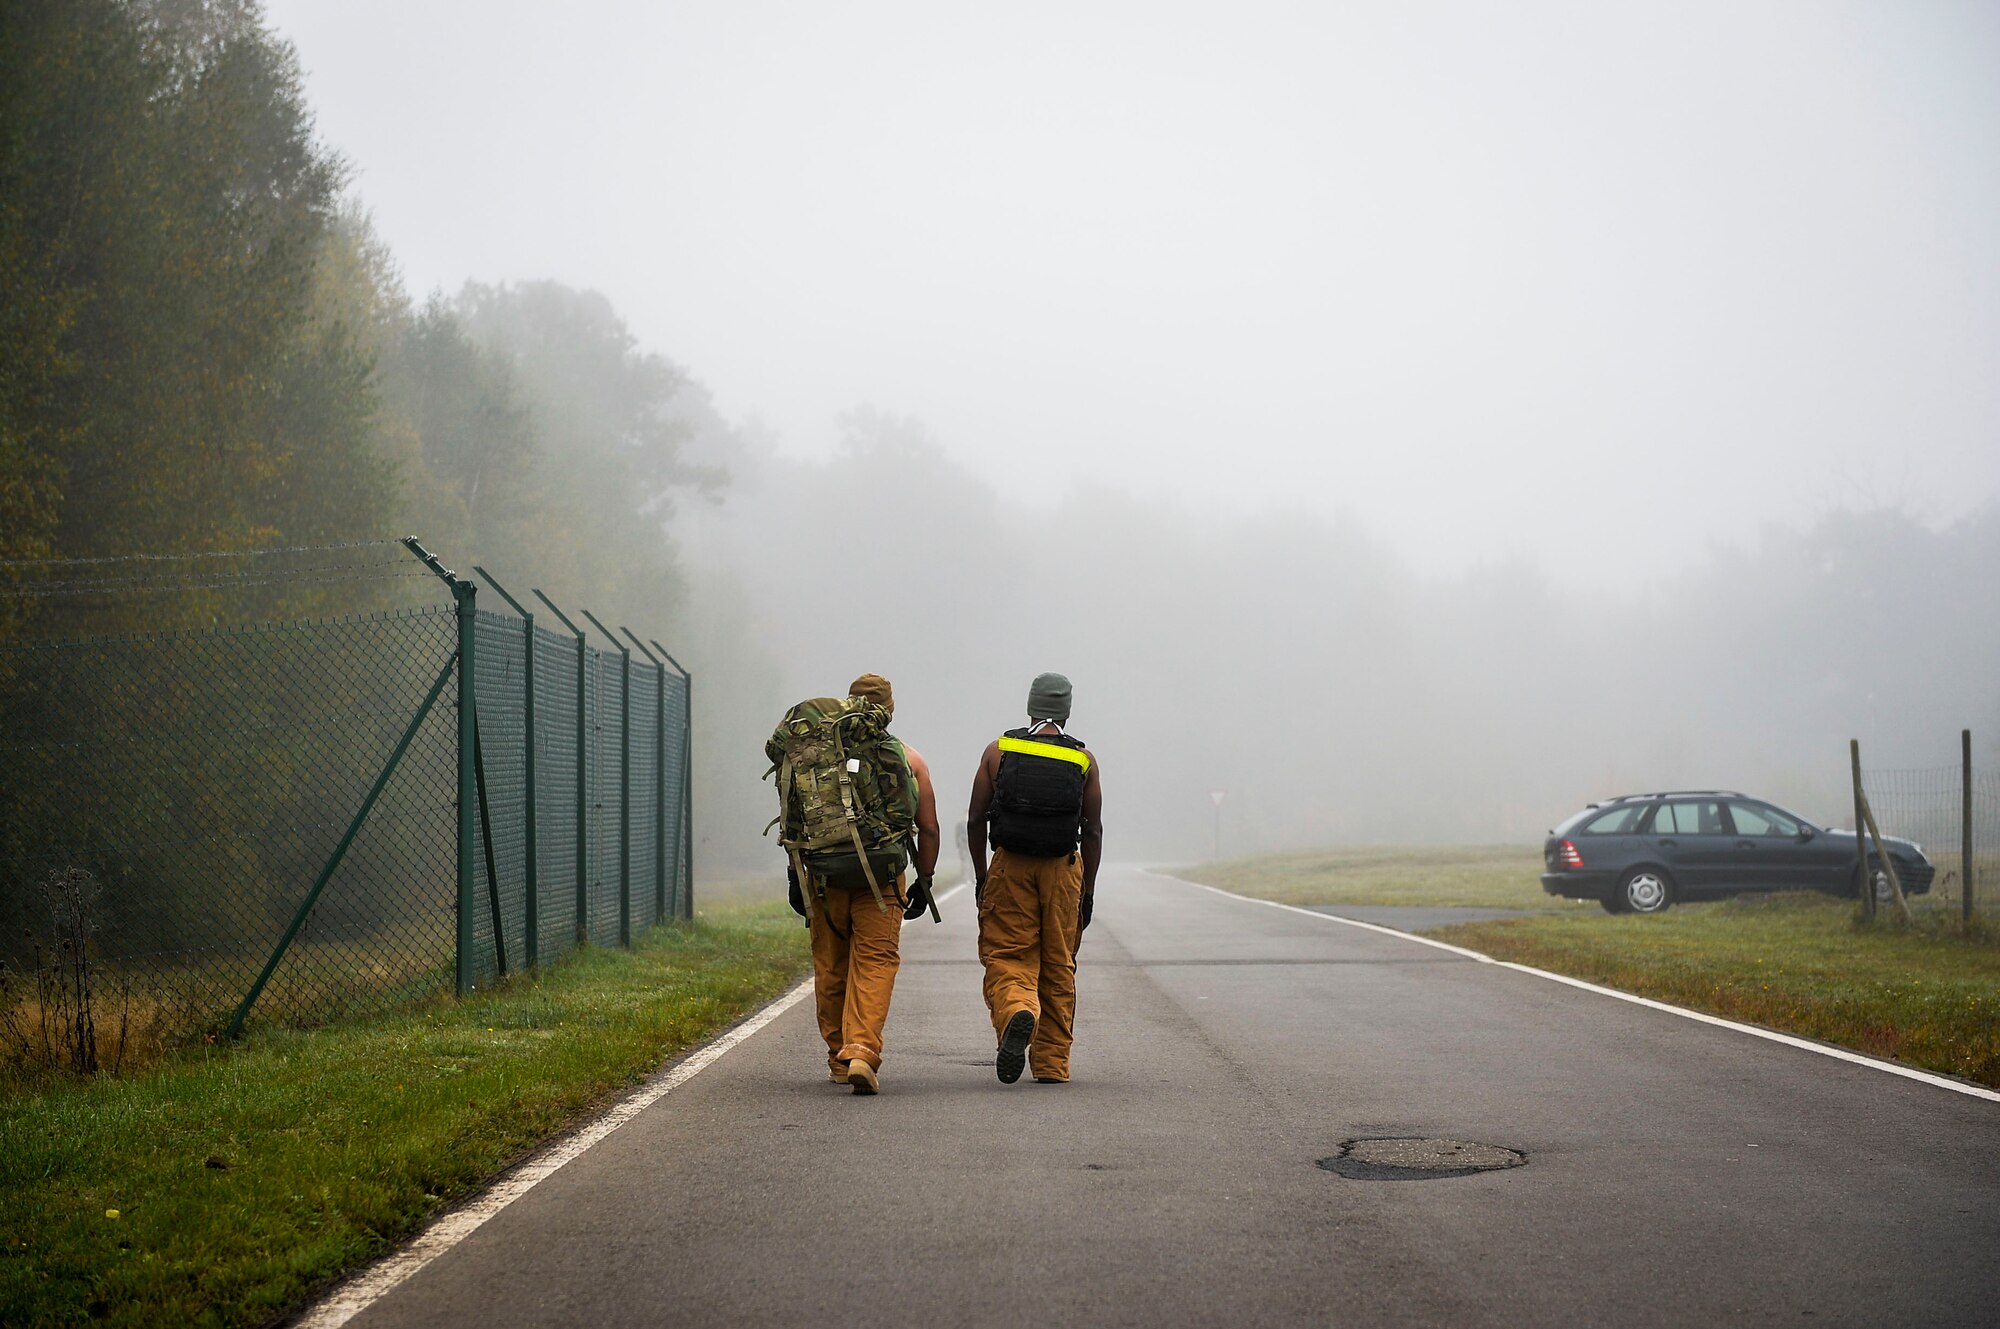 786th Civil Engineer Squadron supervisor Staff Sgt. Israel Ortiz, left, participates in a ruck and run event with Staff Sgt. Berron Johnson, 786th CES NCO in charge of structures at Ramstein Air Base, Germany, Oct. 28, 2016. The 786th CES’s explosive ordnance disposal flight conducts monthly ruck marches which are open to participation from any unit on Ramstein. (U.S. Air Force photo by Airman 1st Class Joshua Magbanua)